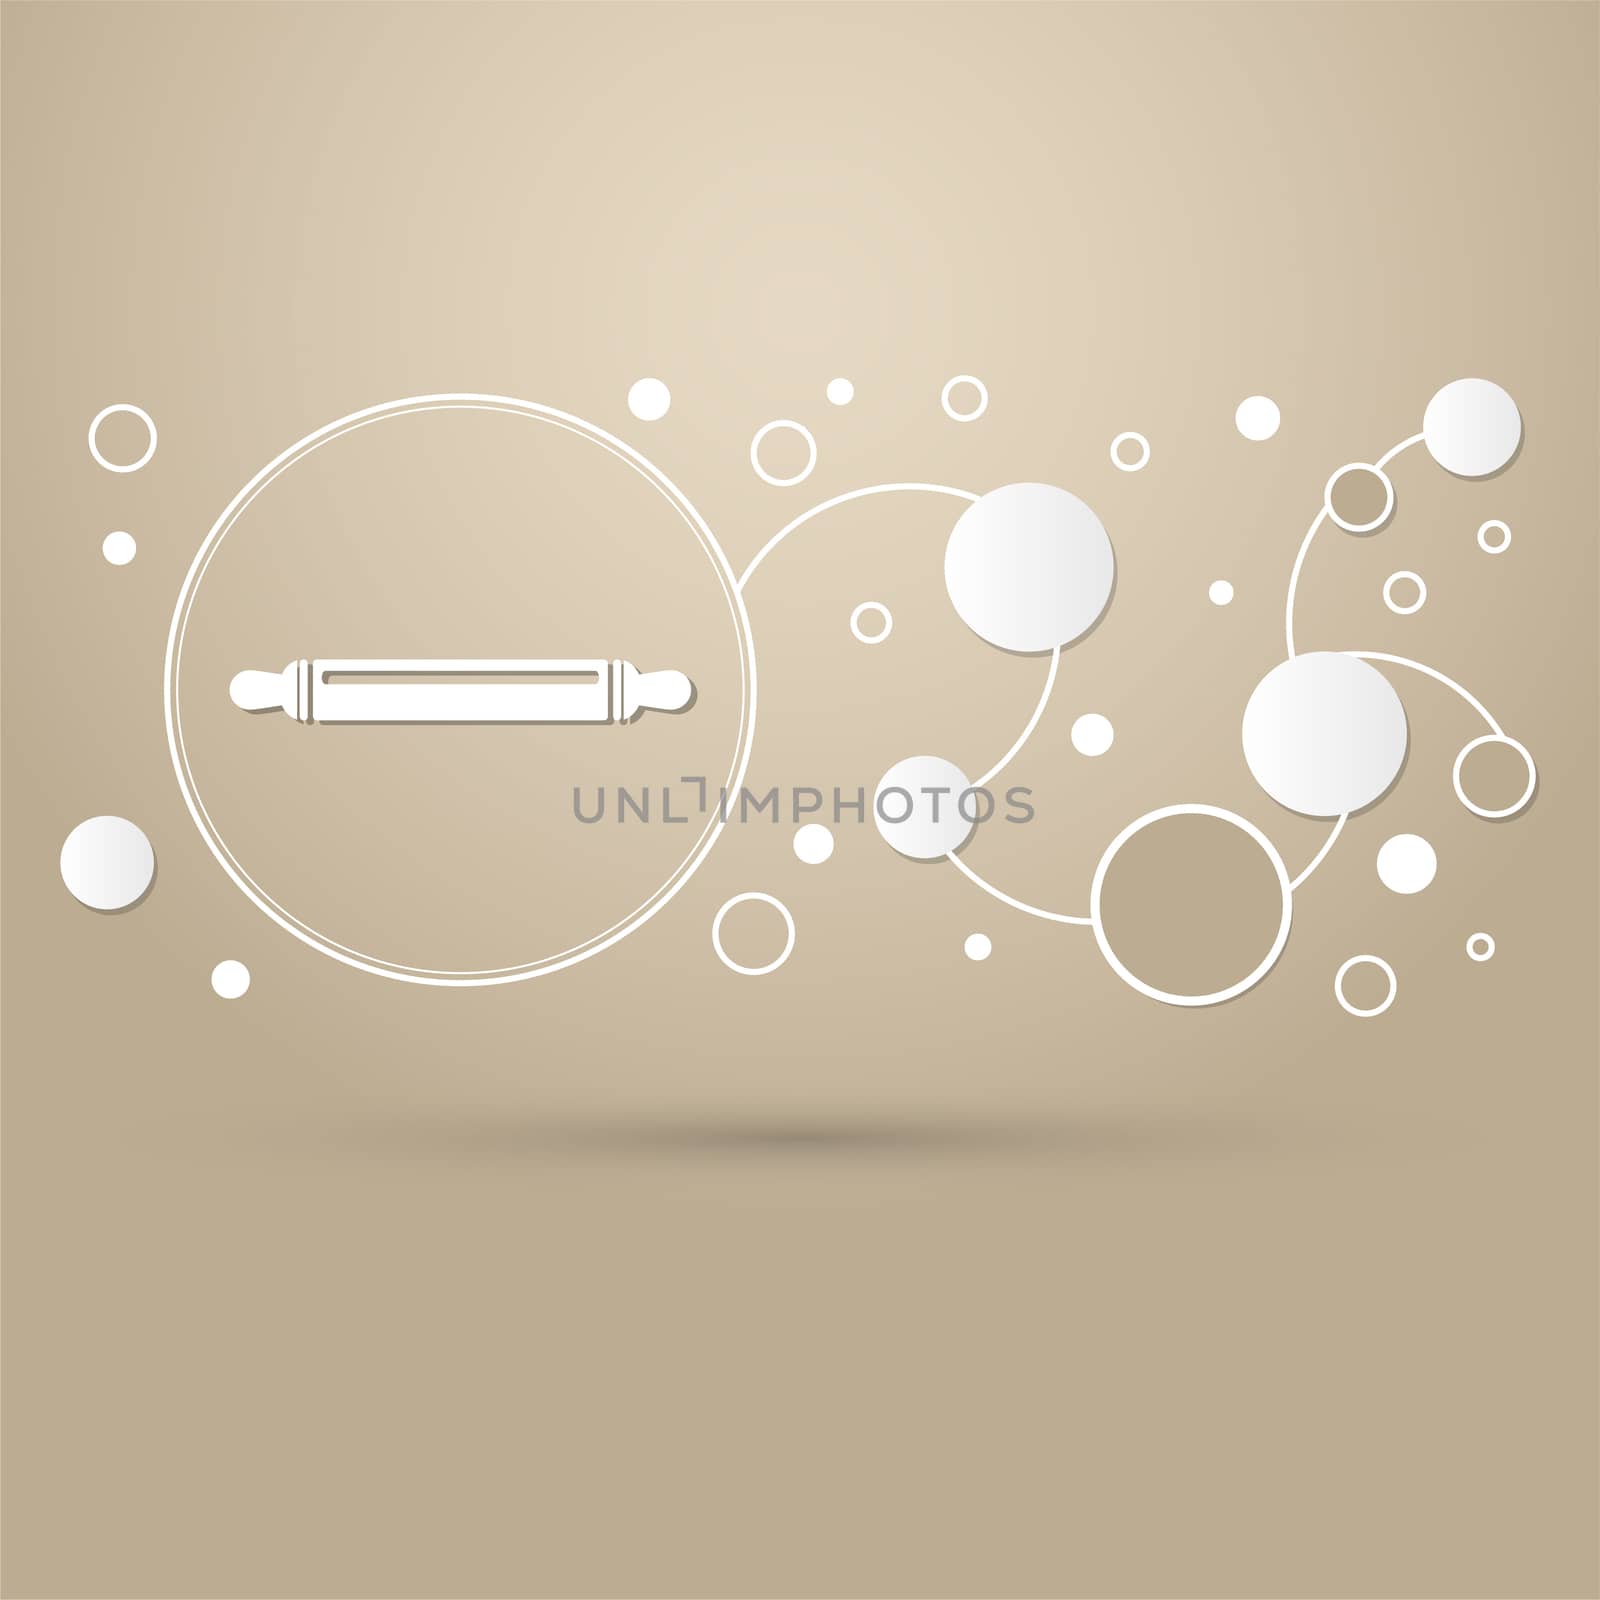 Roller, flour icon on a brown background with elegant style and modern design infographic. illustration